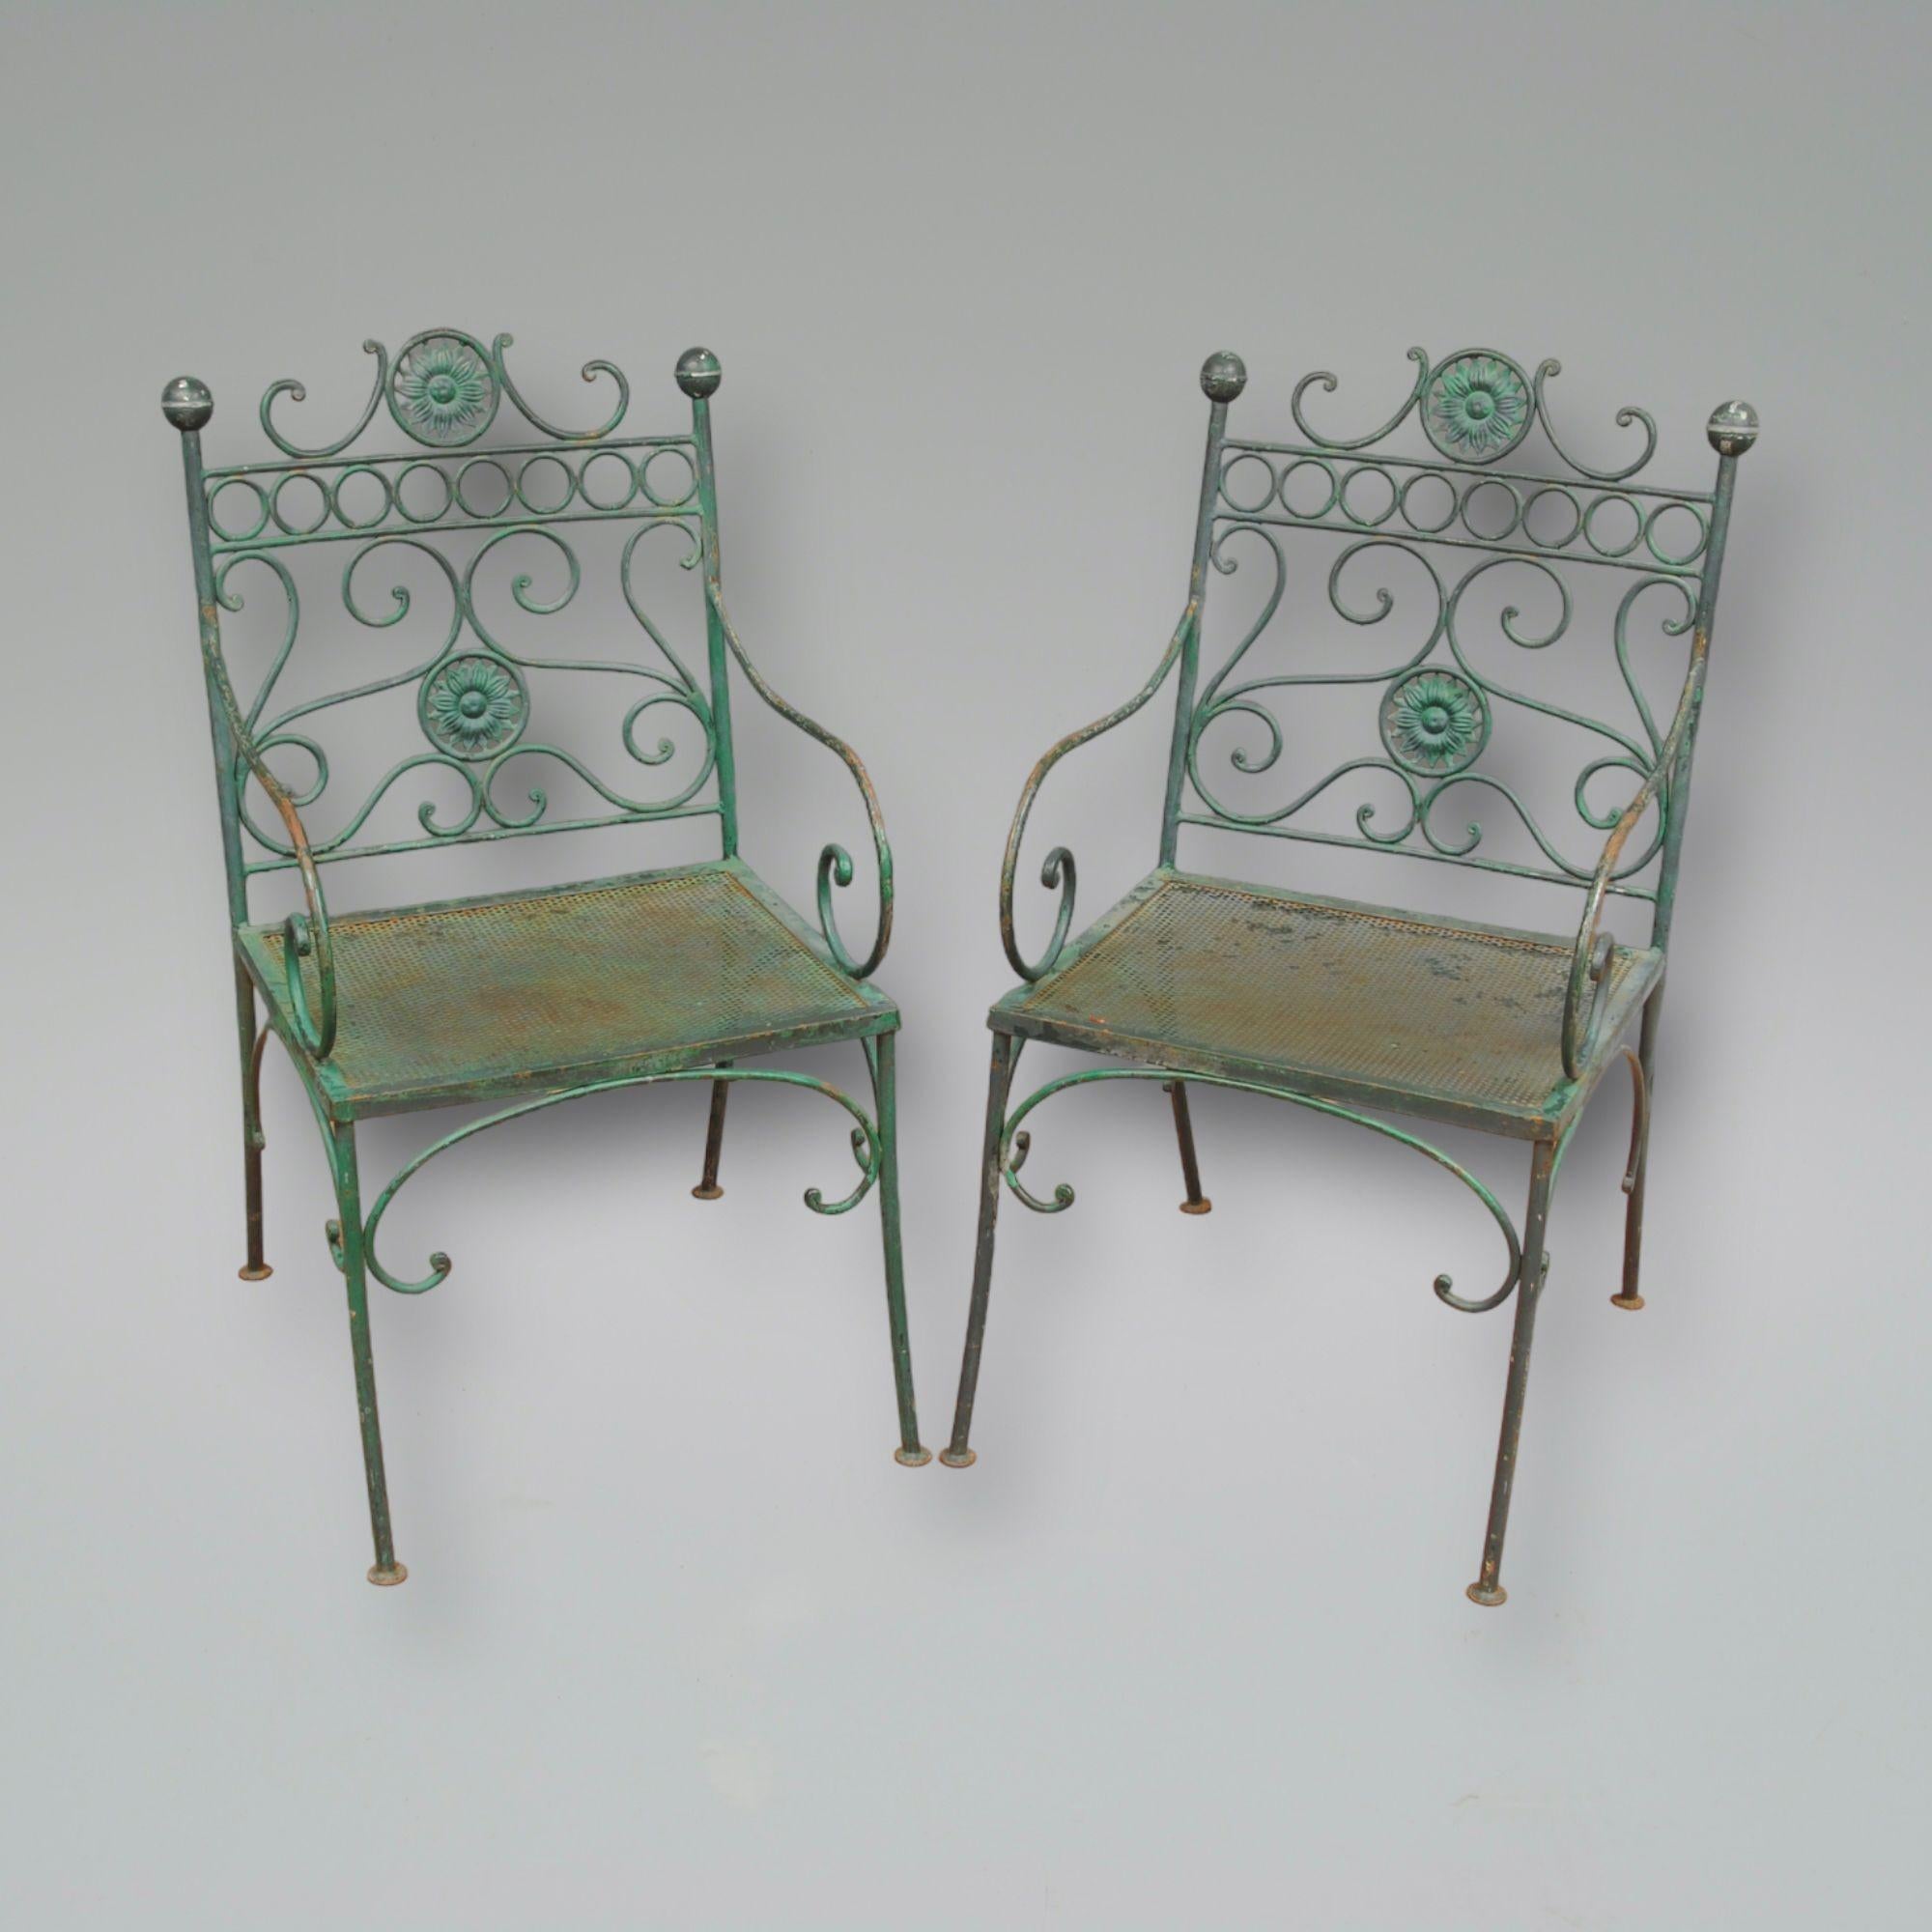 A decorative set of four green painted french metal garden armchairs.